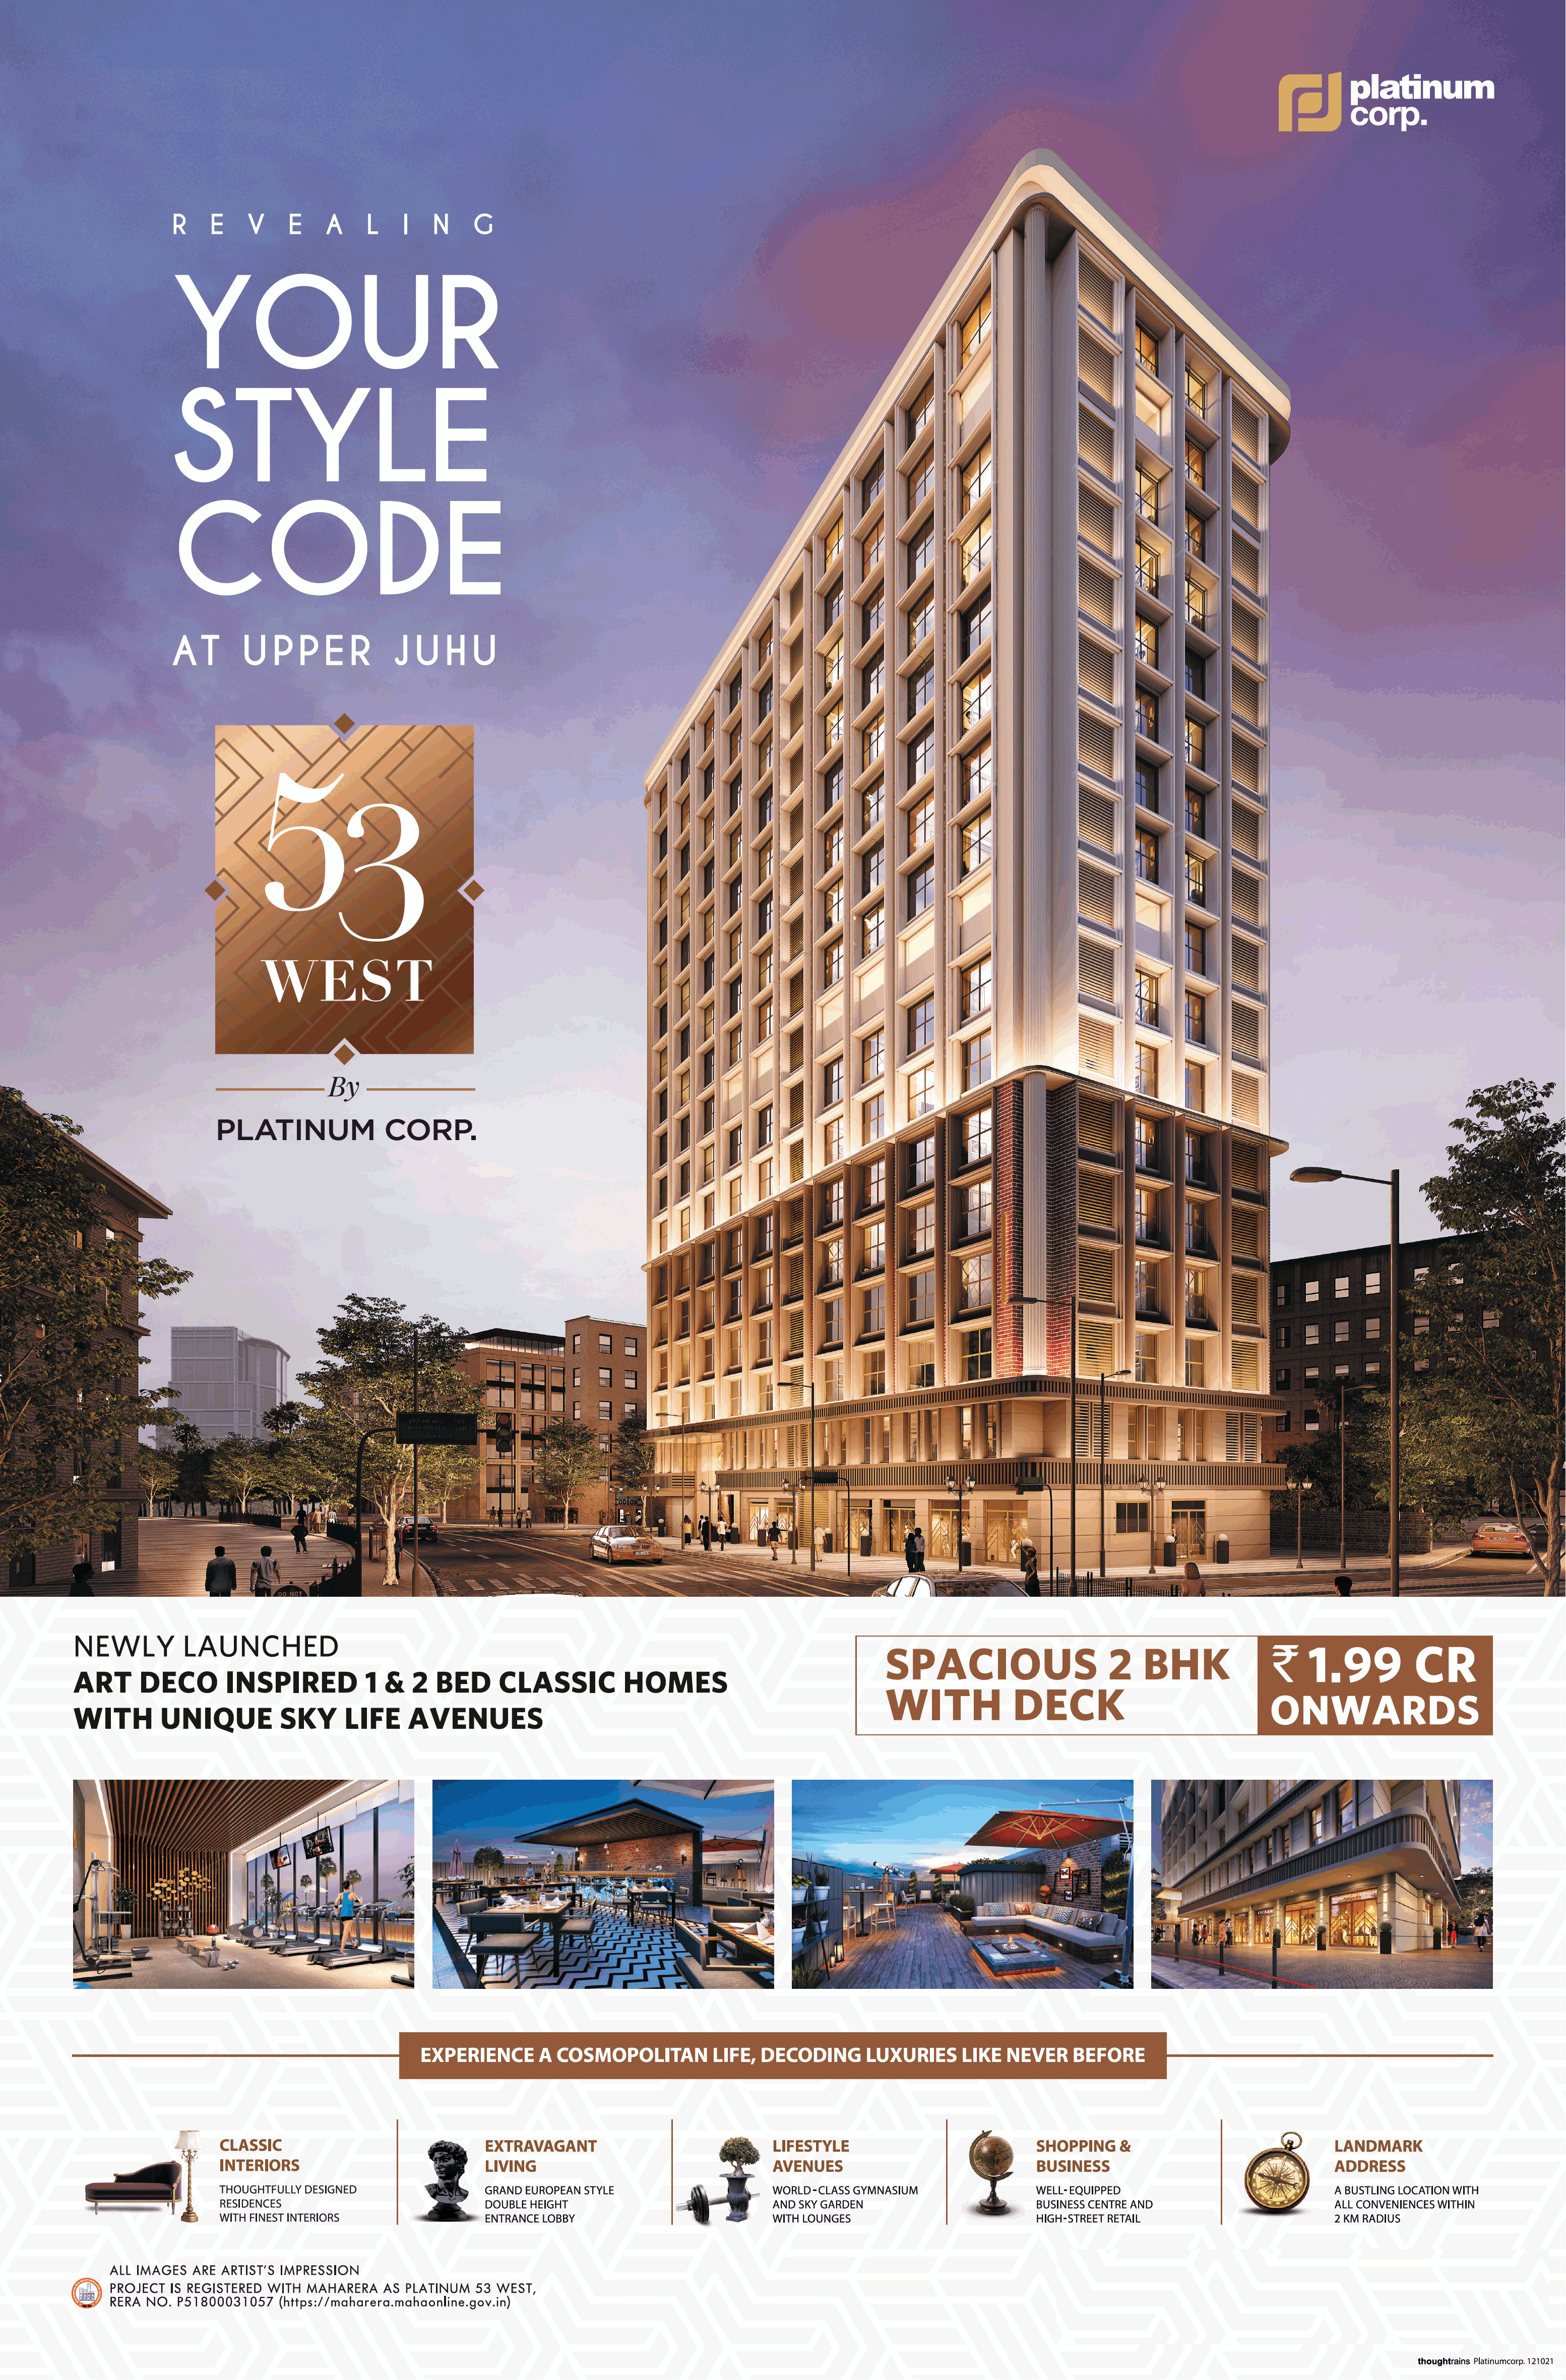 Newly launched art deco inspired 1 & 2 bed classic homes with unique sky life avenues at Platinum 53 West, Mumbai,